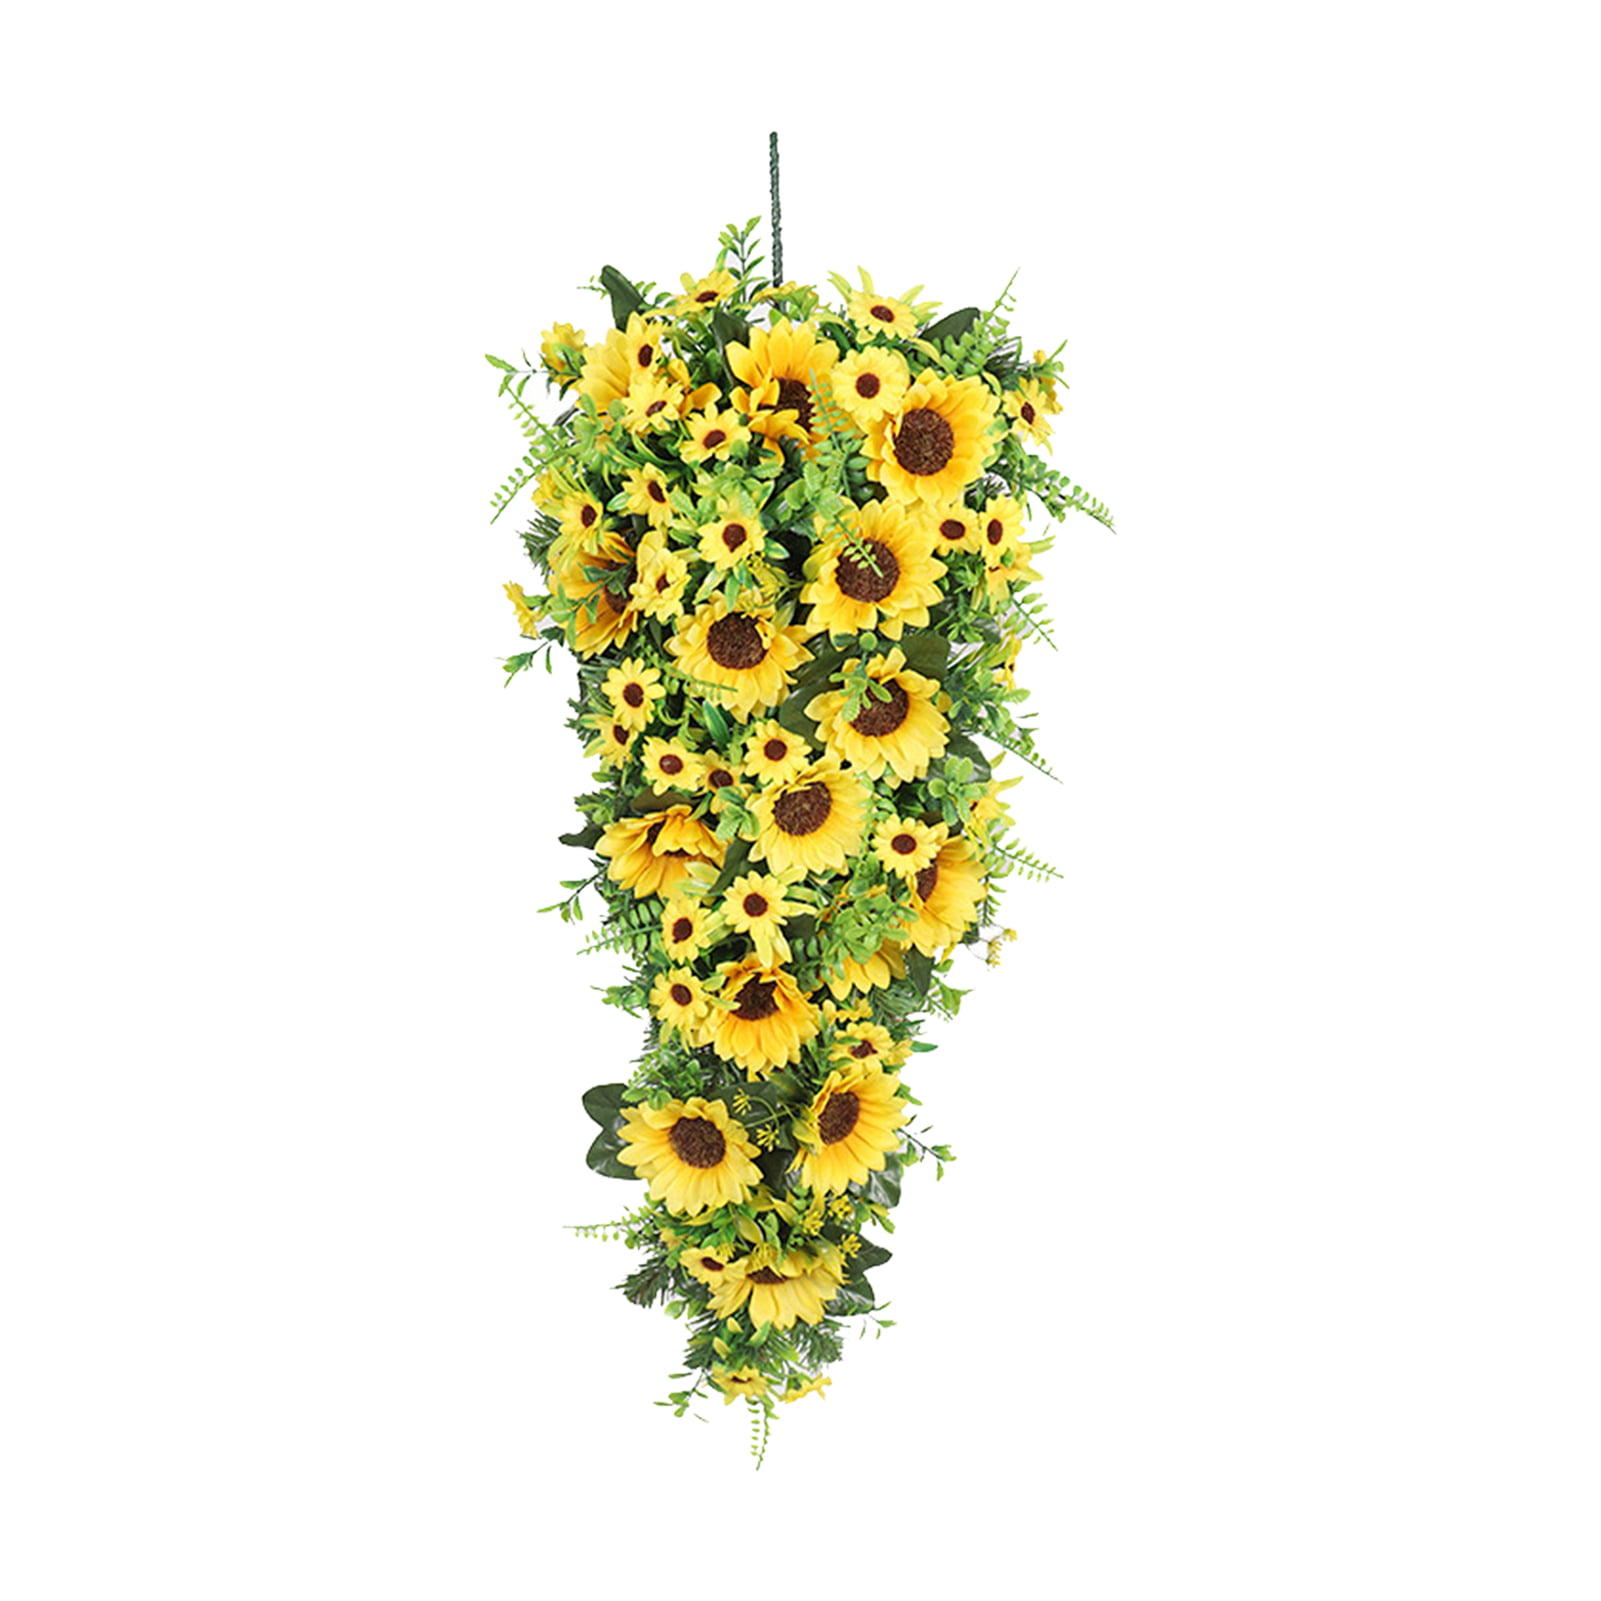 Details about   Artificial Sunflower Garland Fake Flowers Ivy Silk Leaf Plants Home Decor 